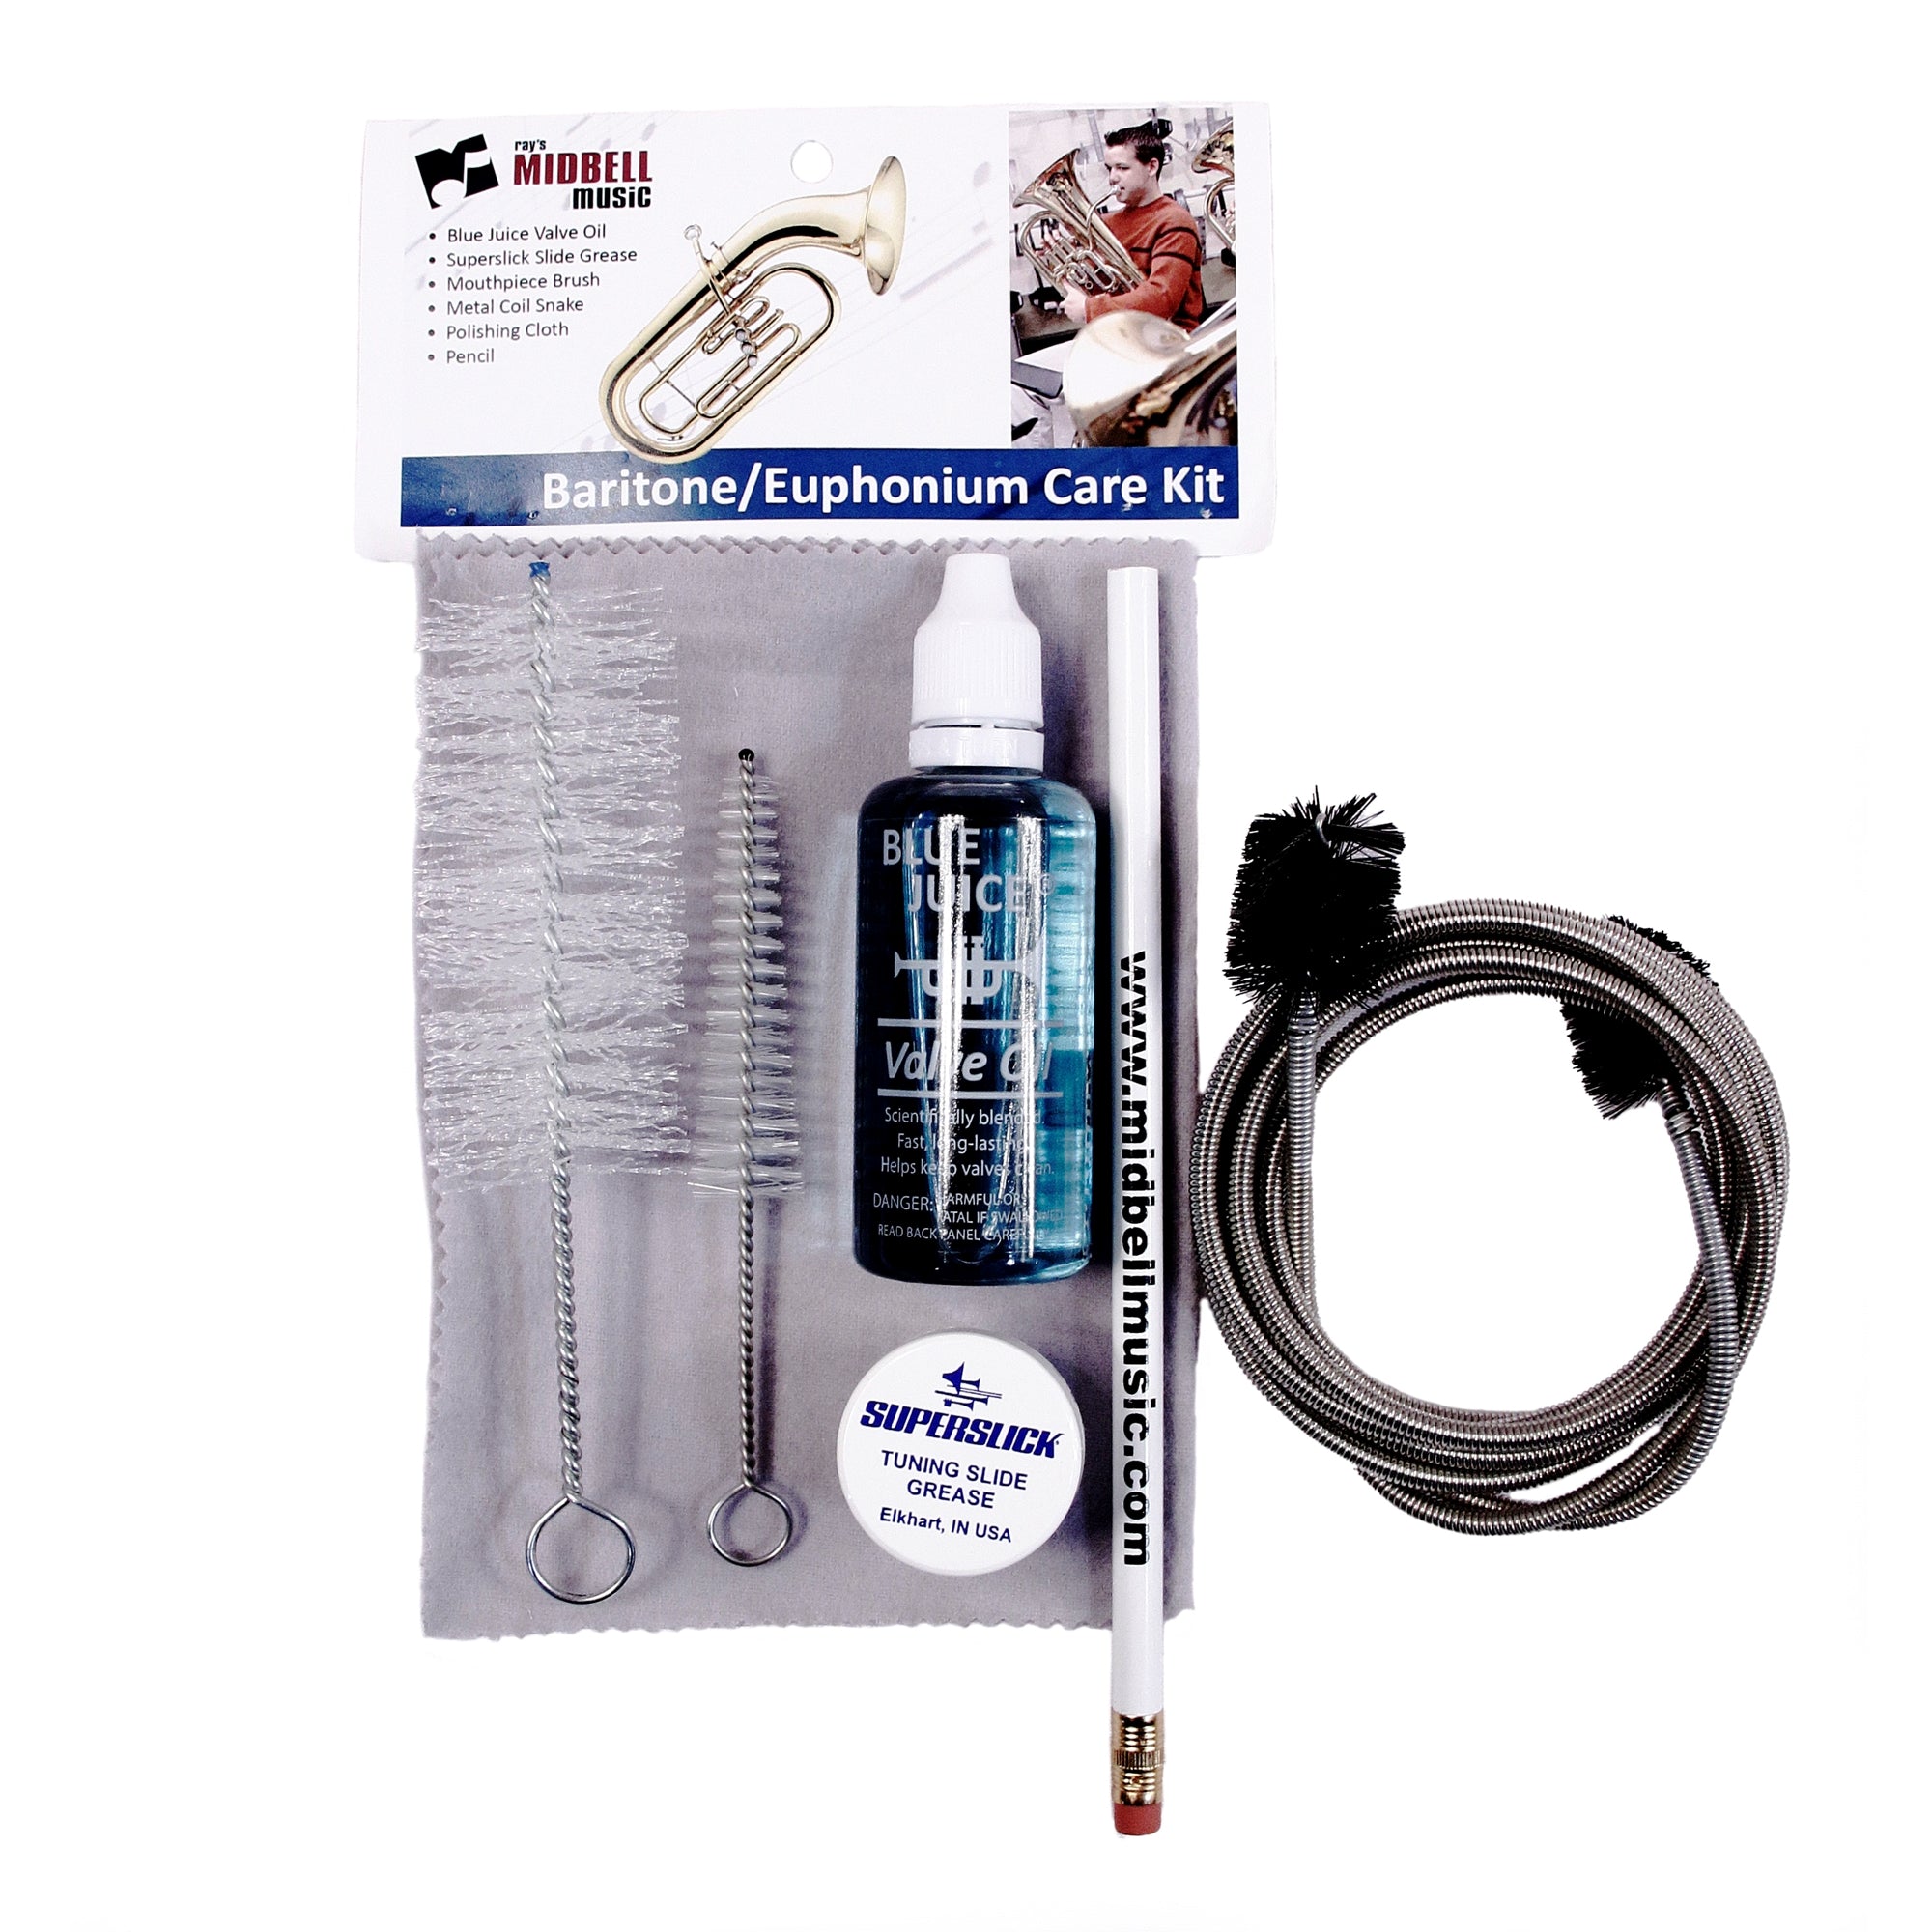 MIDBELL IBHCK2 Baritone Horn Care Kit w/ Blue Juice - Ray's Midbell Music